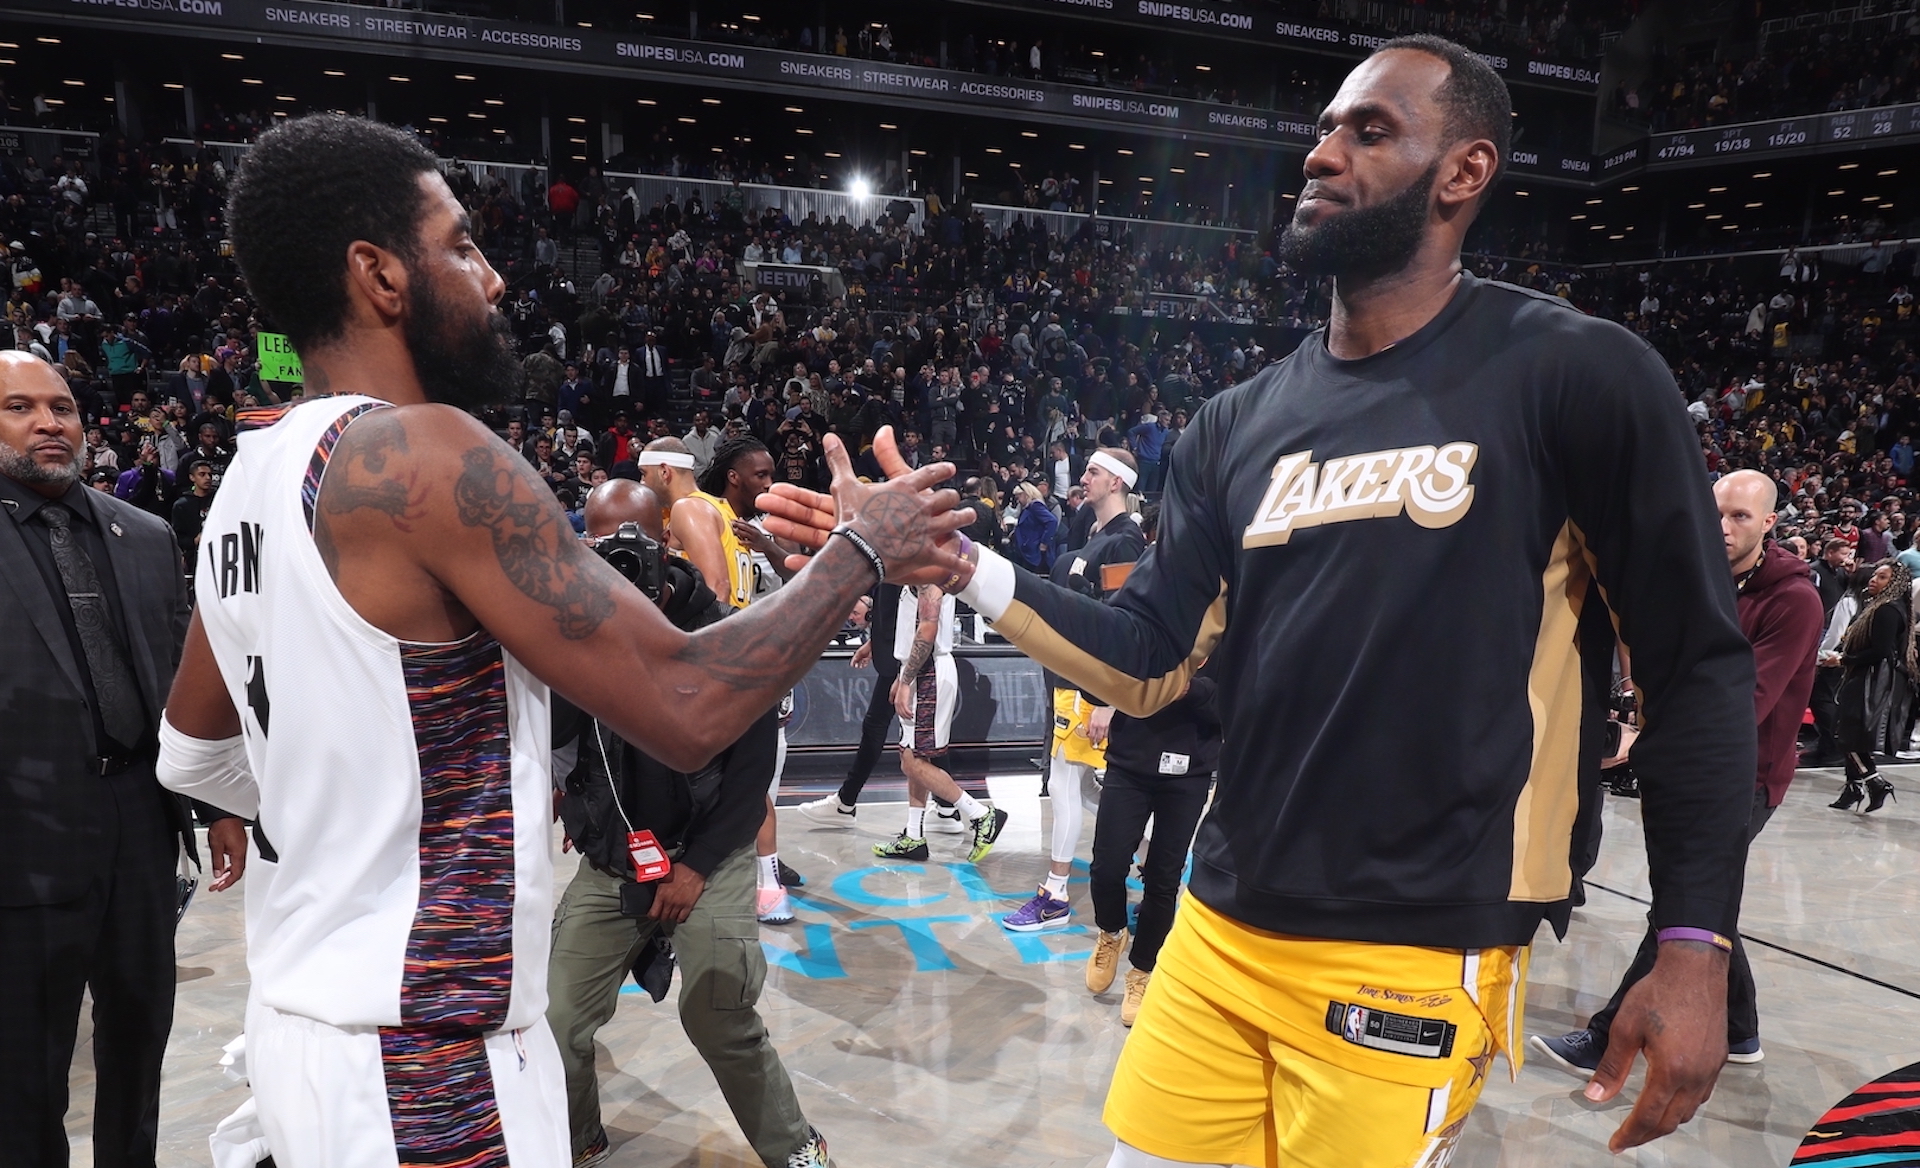 LeBron James: Kyrie Irving 'caused some harm' in sharing antisemitic  documentary